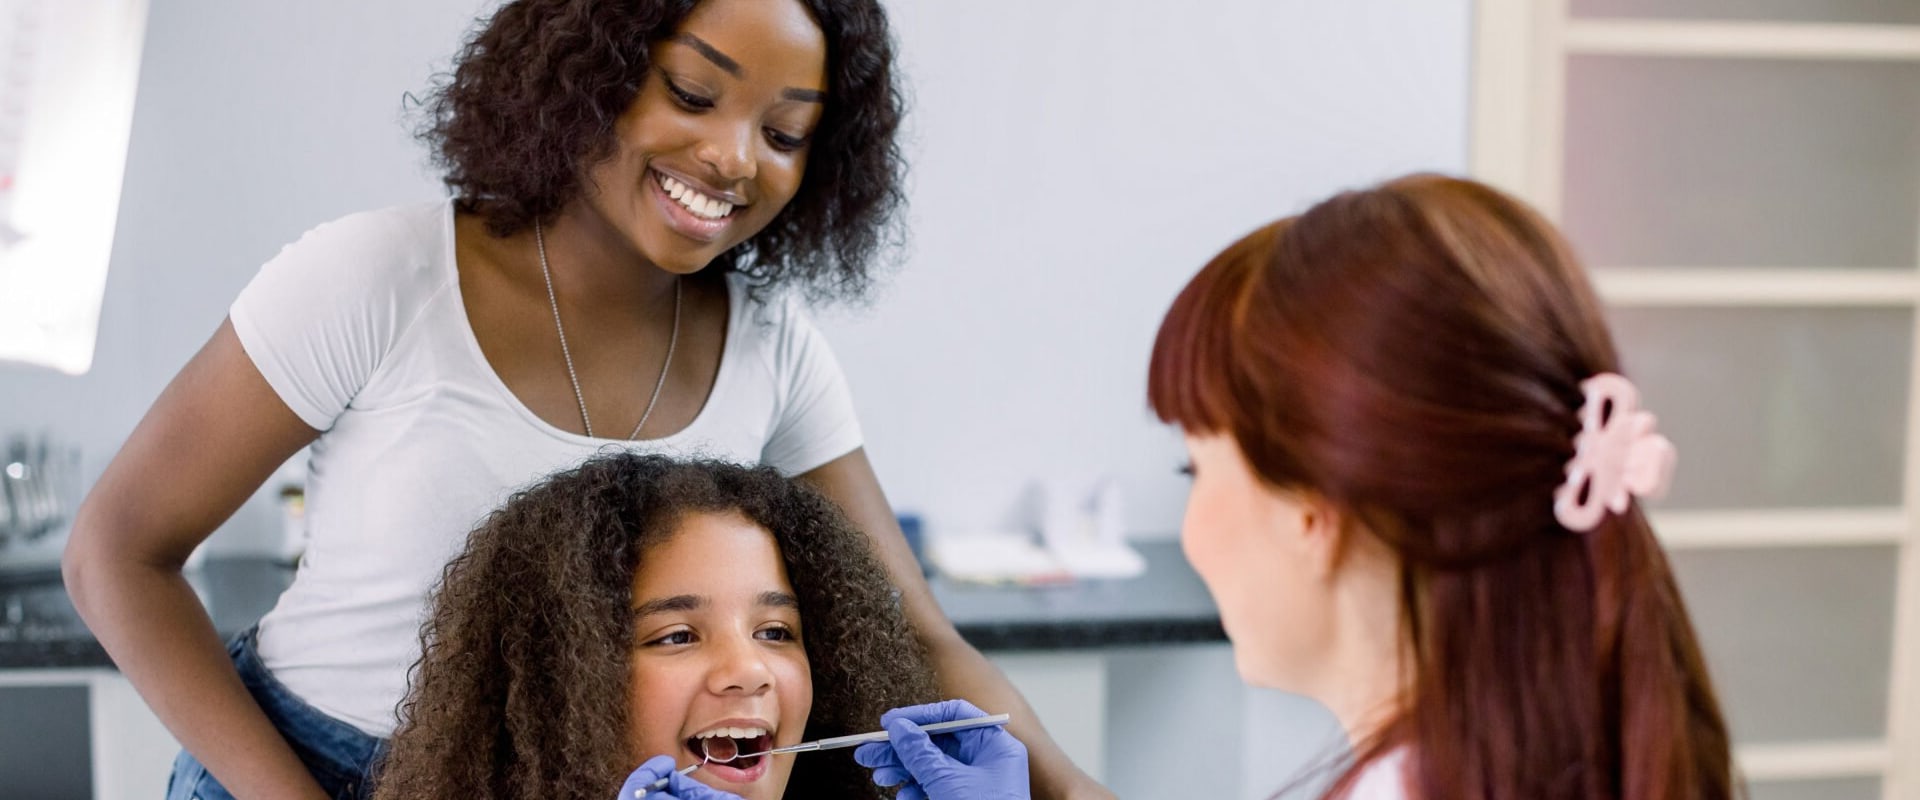 General Dentistry In Sterling, Virginia: Your Gateway To Comprehensive Dental Care Services